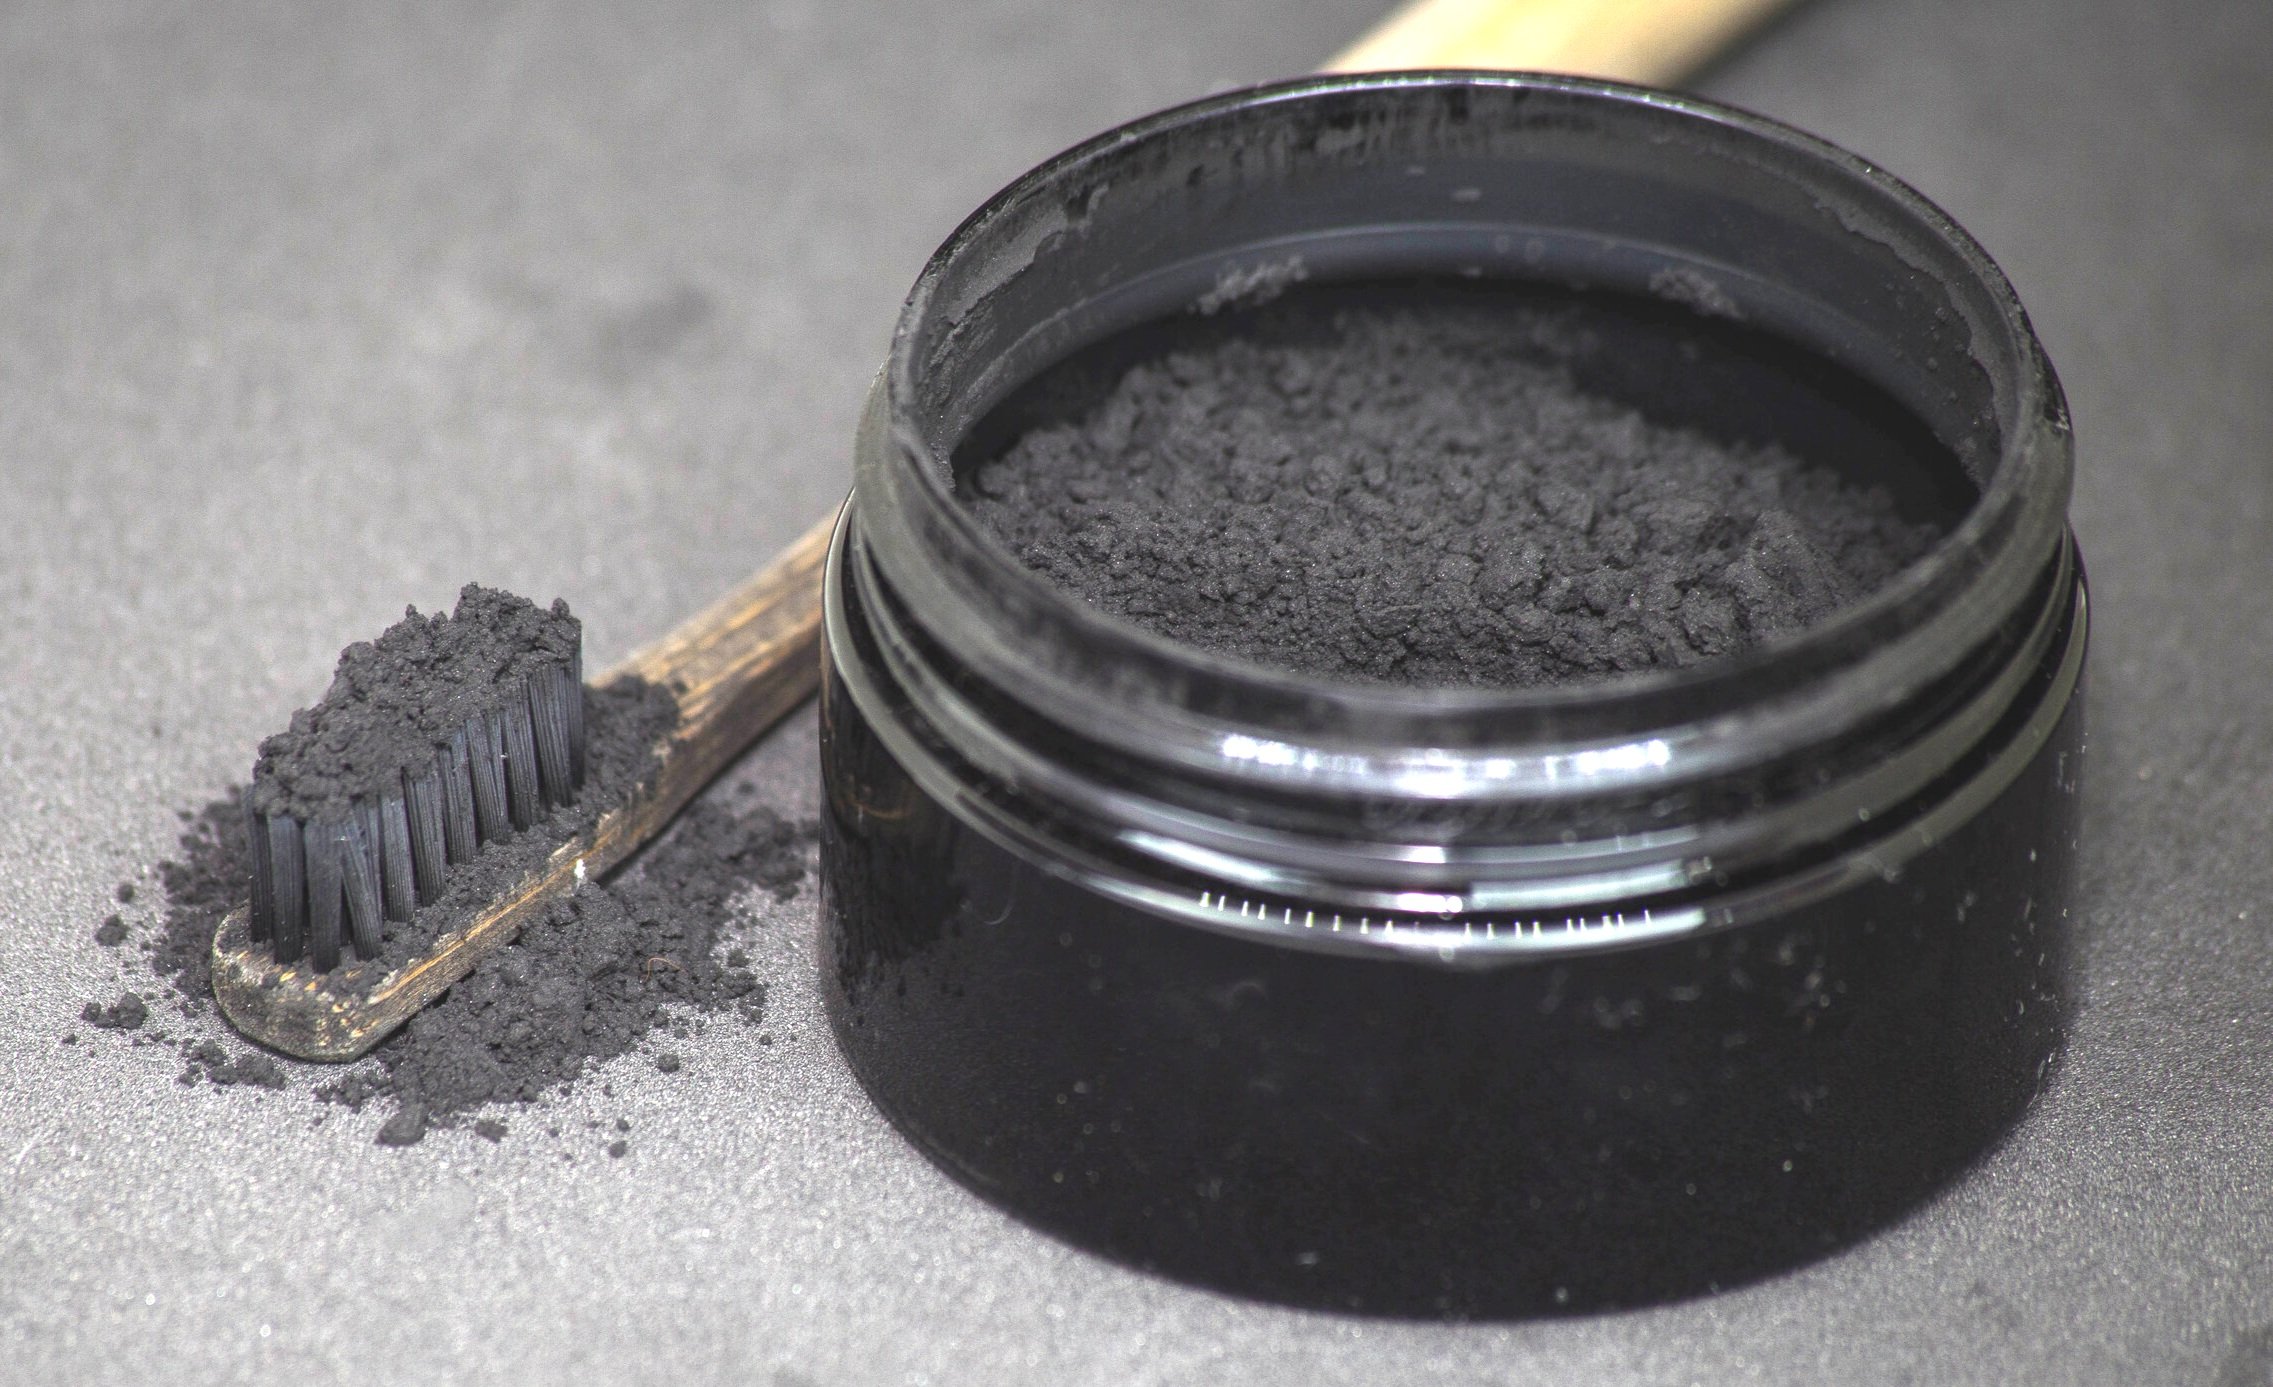 Benefits of Activated Charcoal Powder